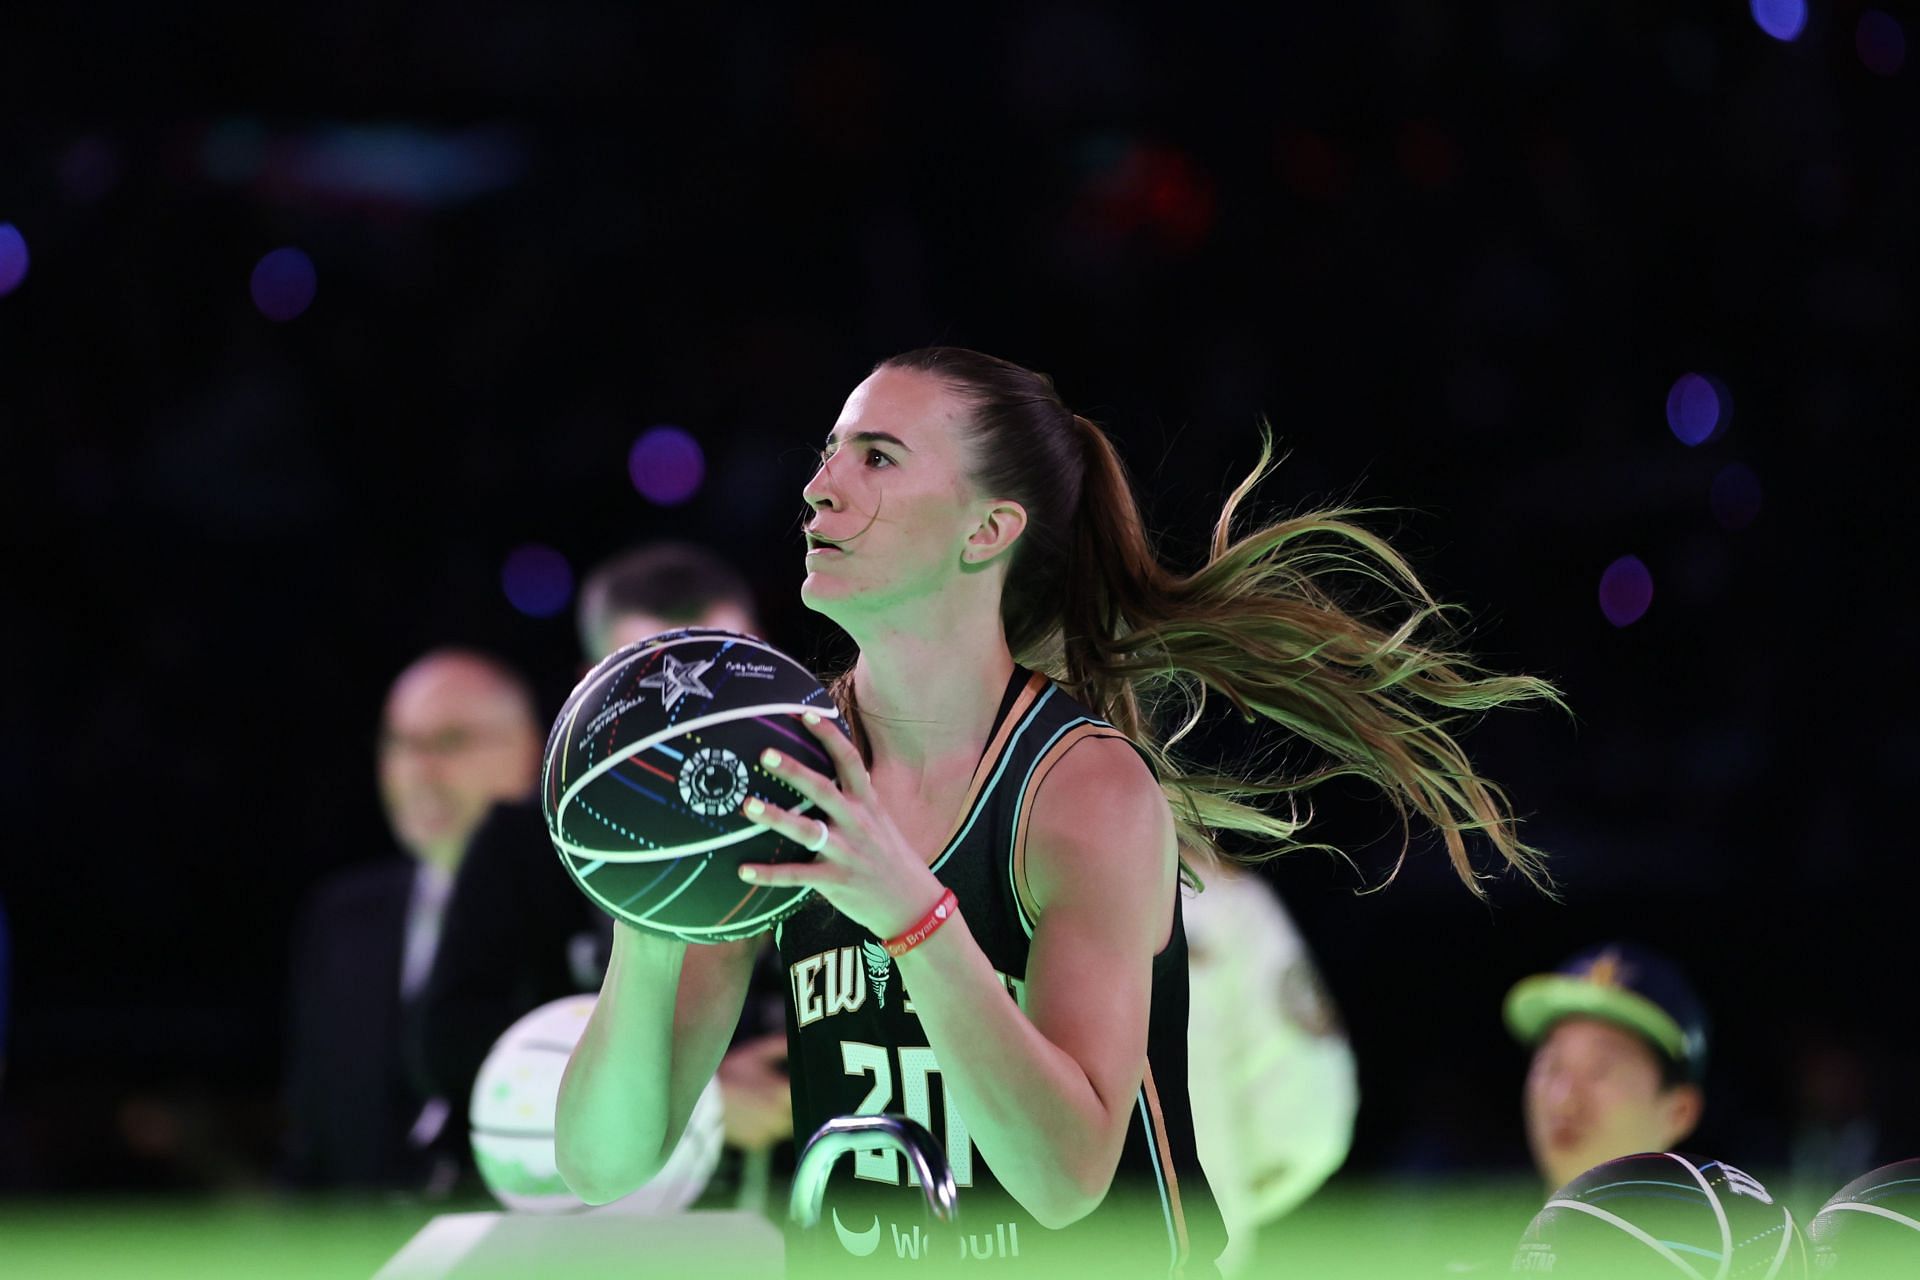 Sabrina Ionescu of the New York Liberty might be a future teammate of Mackenzie Holmes.